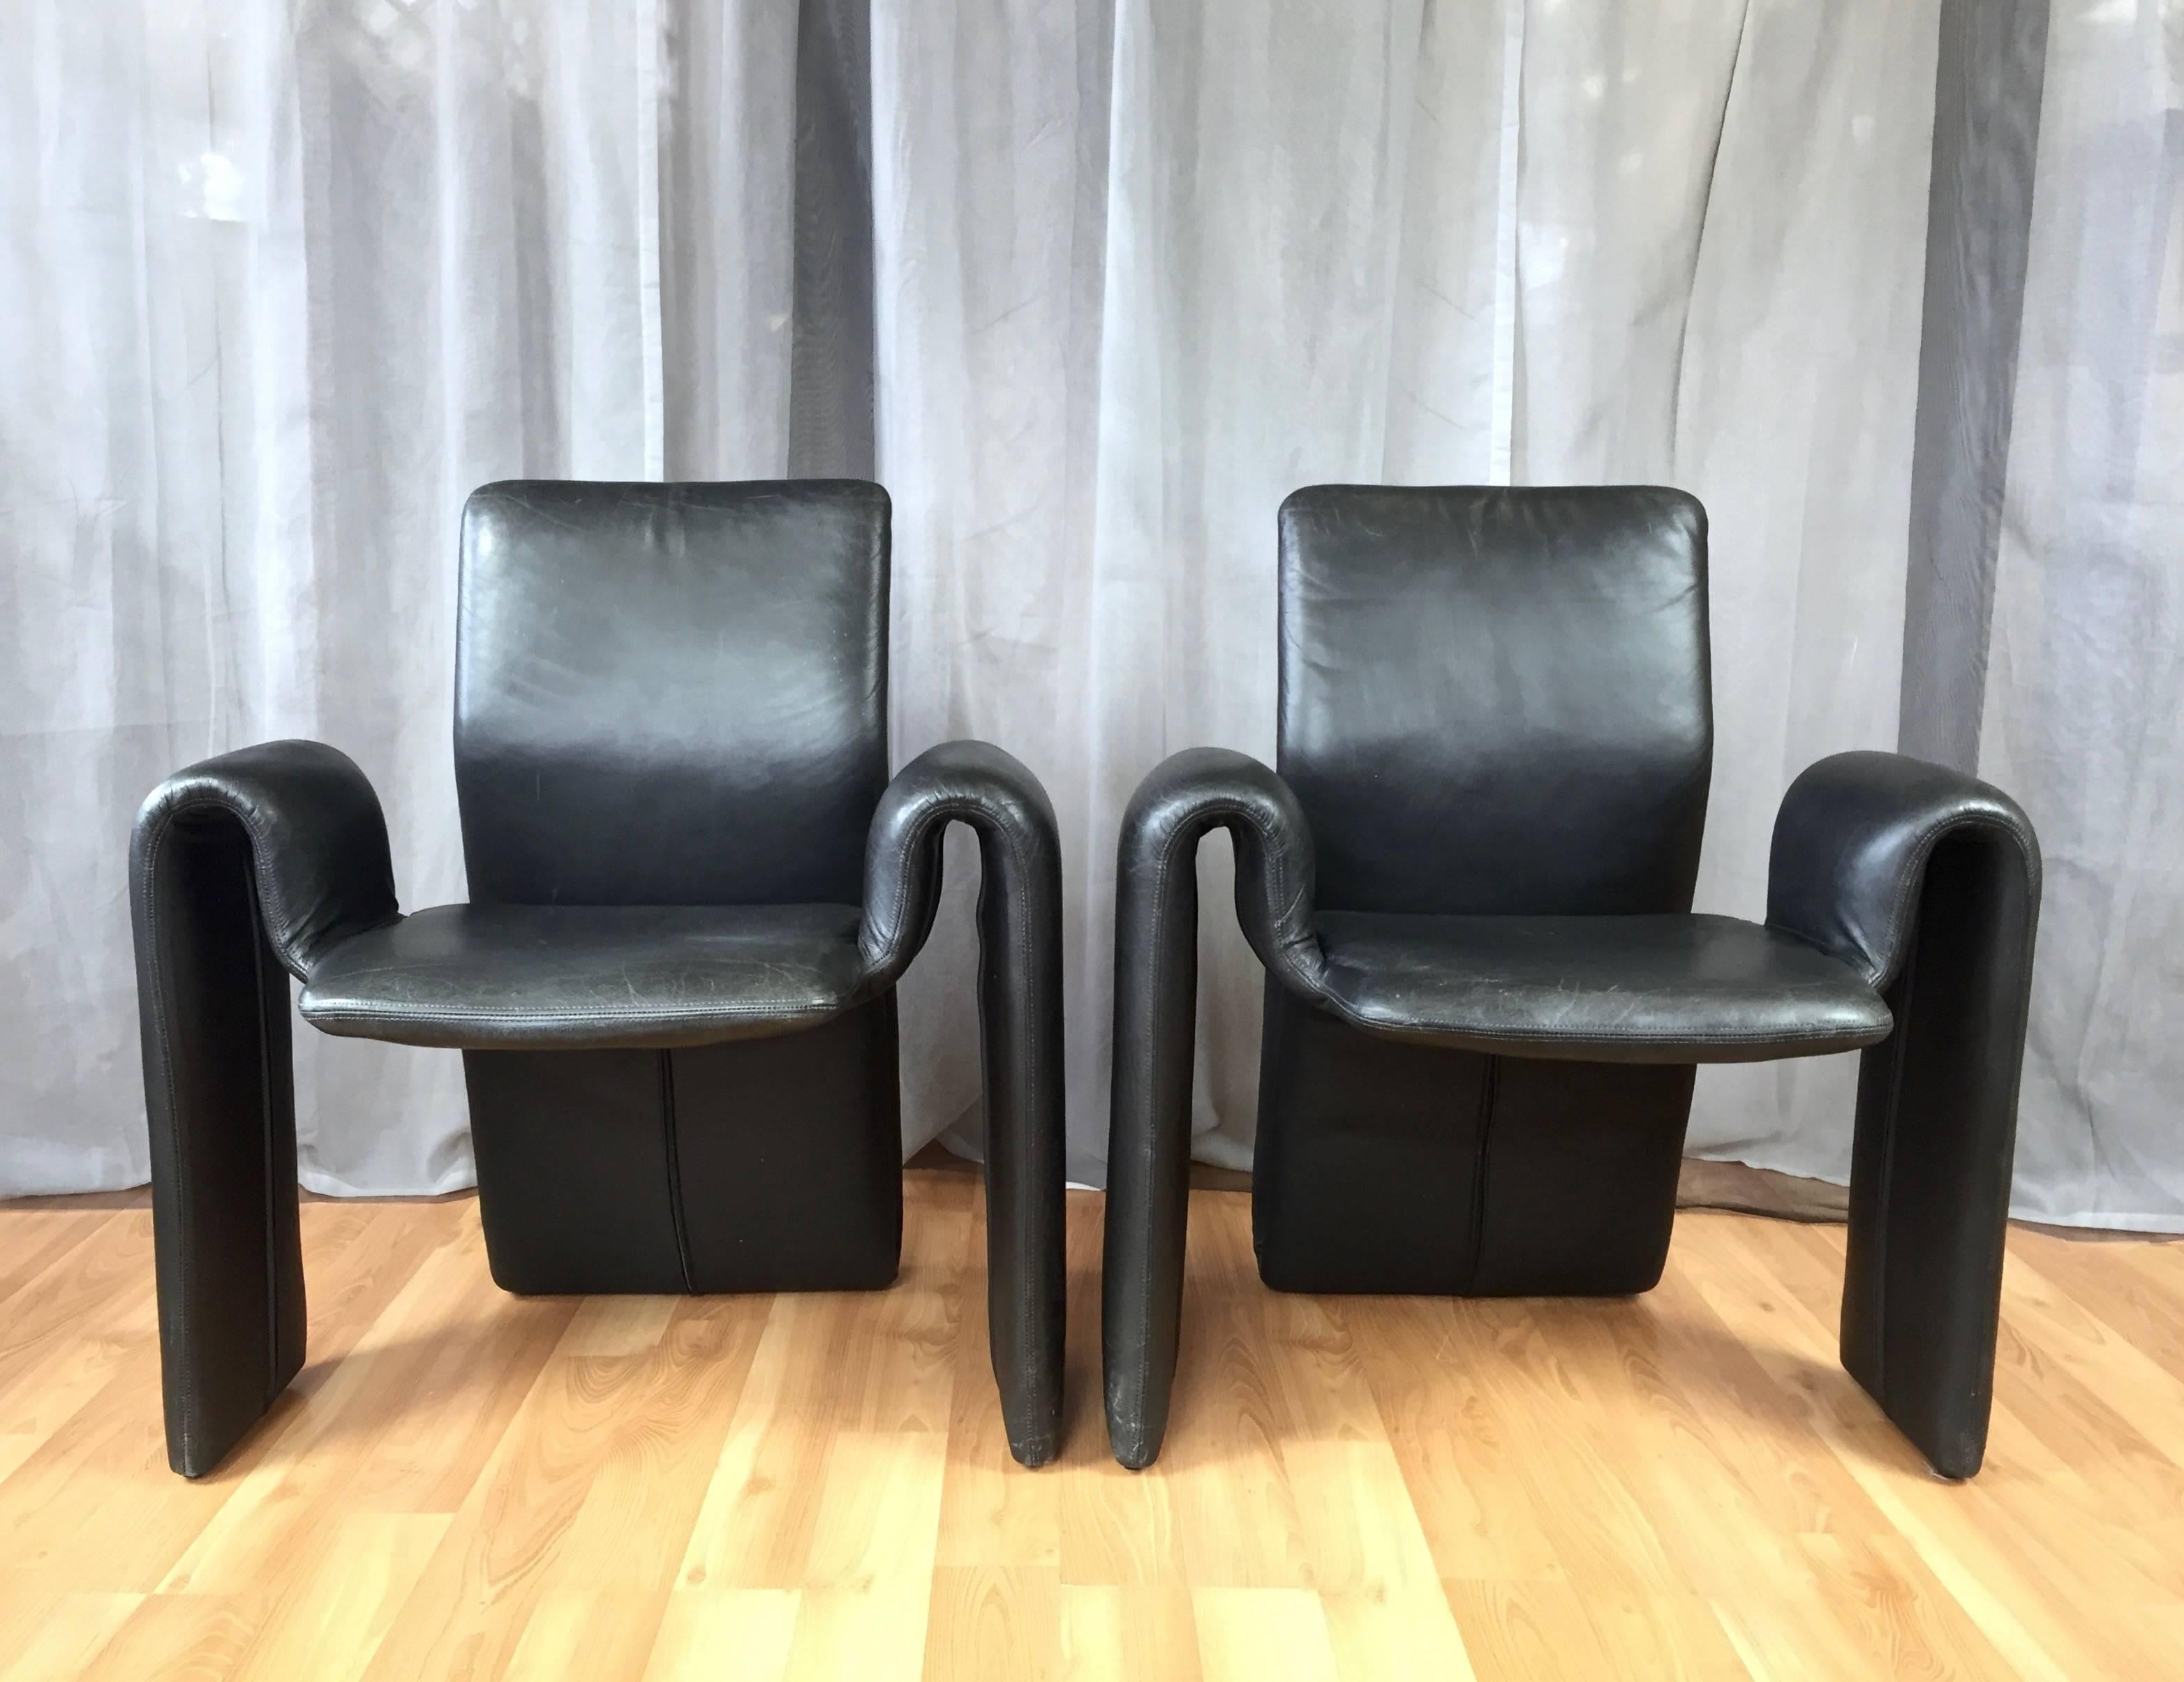 A rare four-piece set of black leather dining chairs by Steve Leonard for Brayton International Collection.

Sinuous shape is evocative of the futuristic designs of Olivier Mourgue or Pierre Paulin. Back has a bit of flex to it, making it a